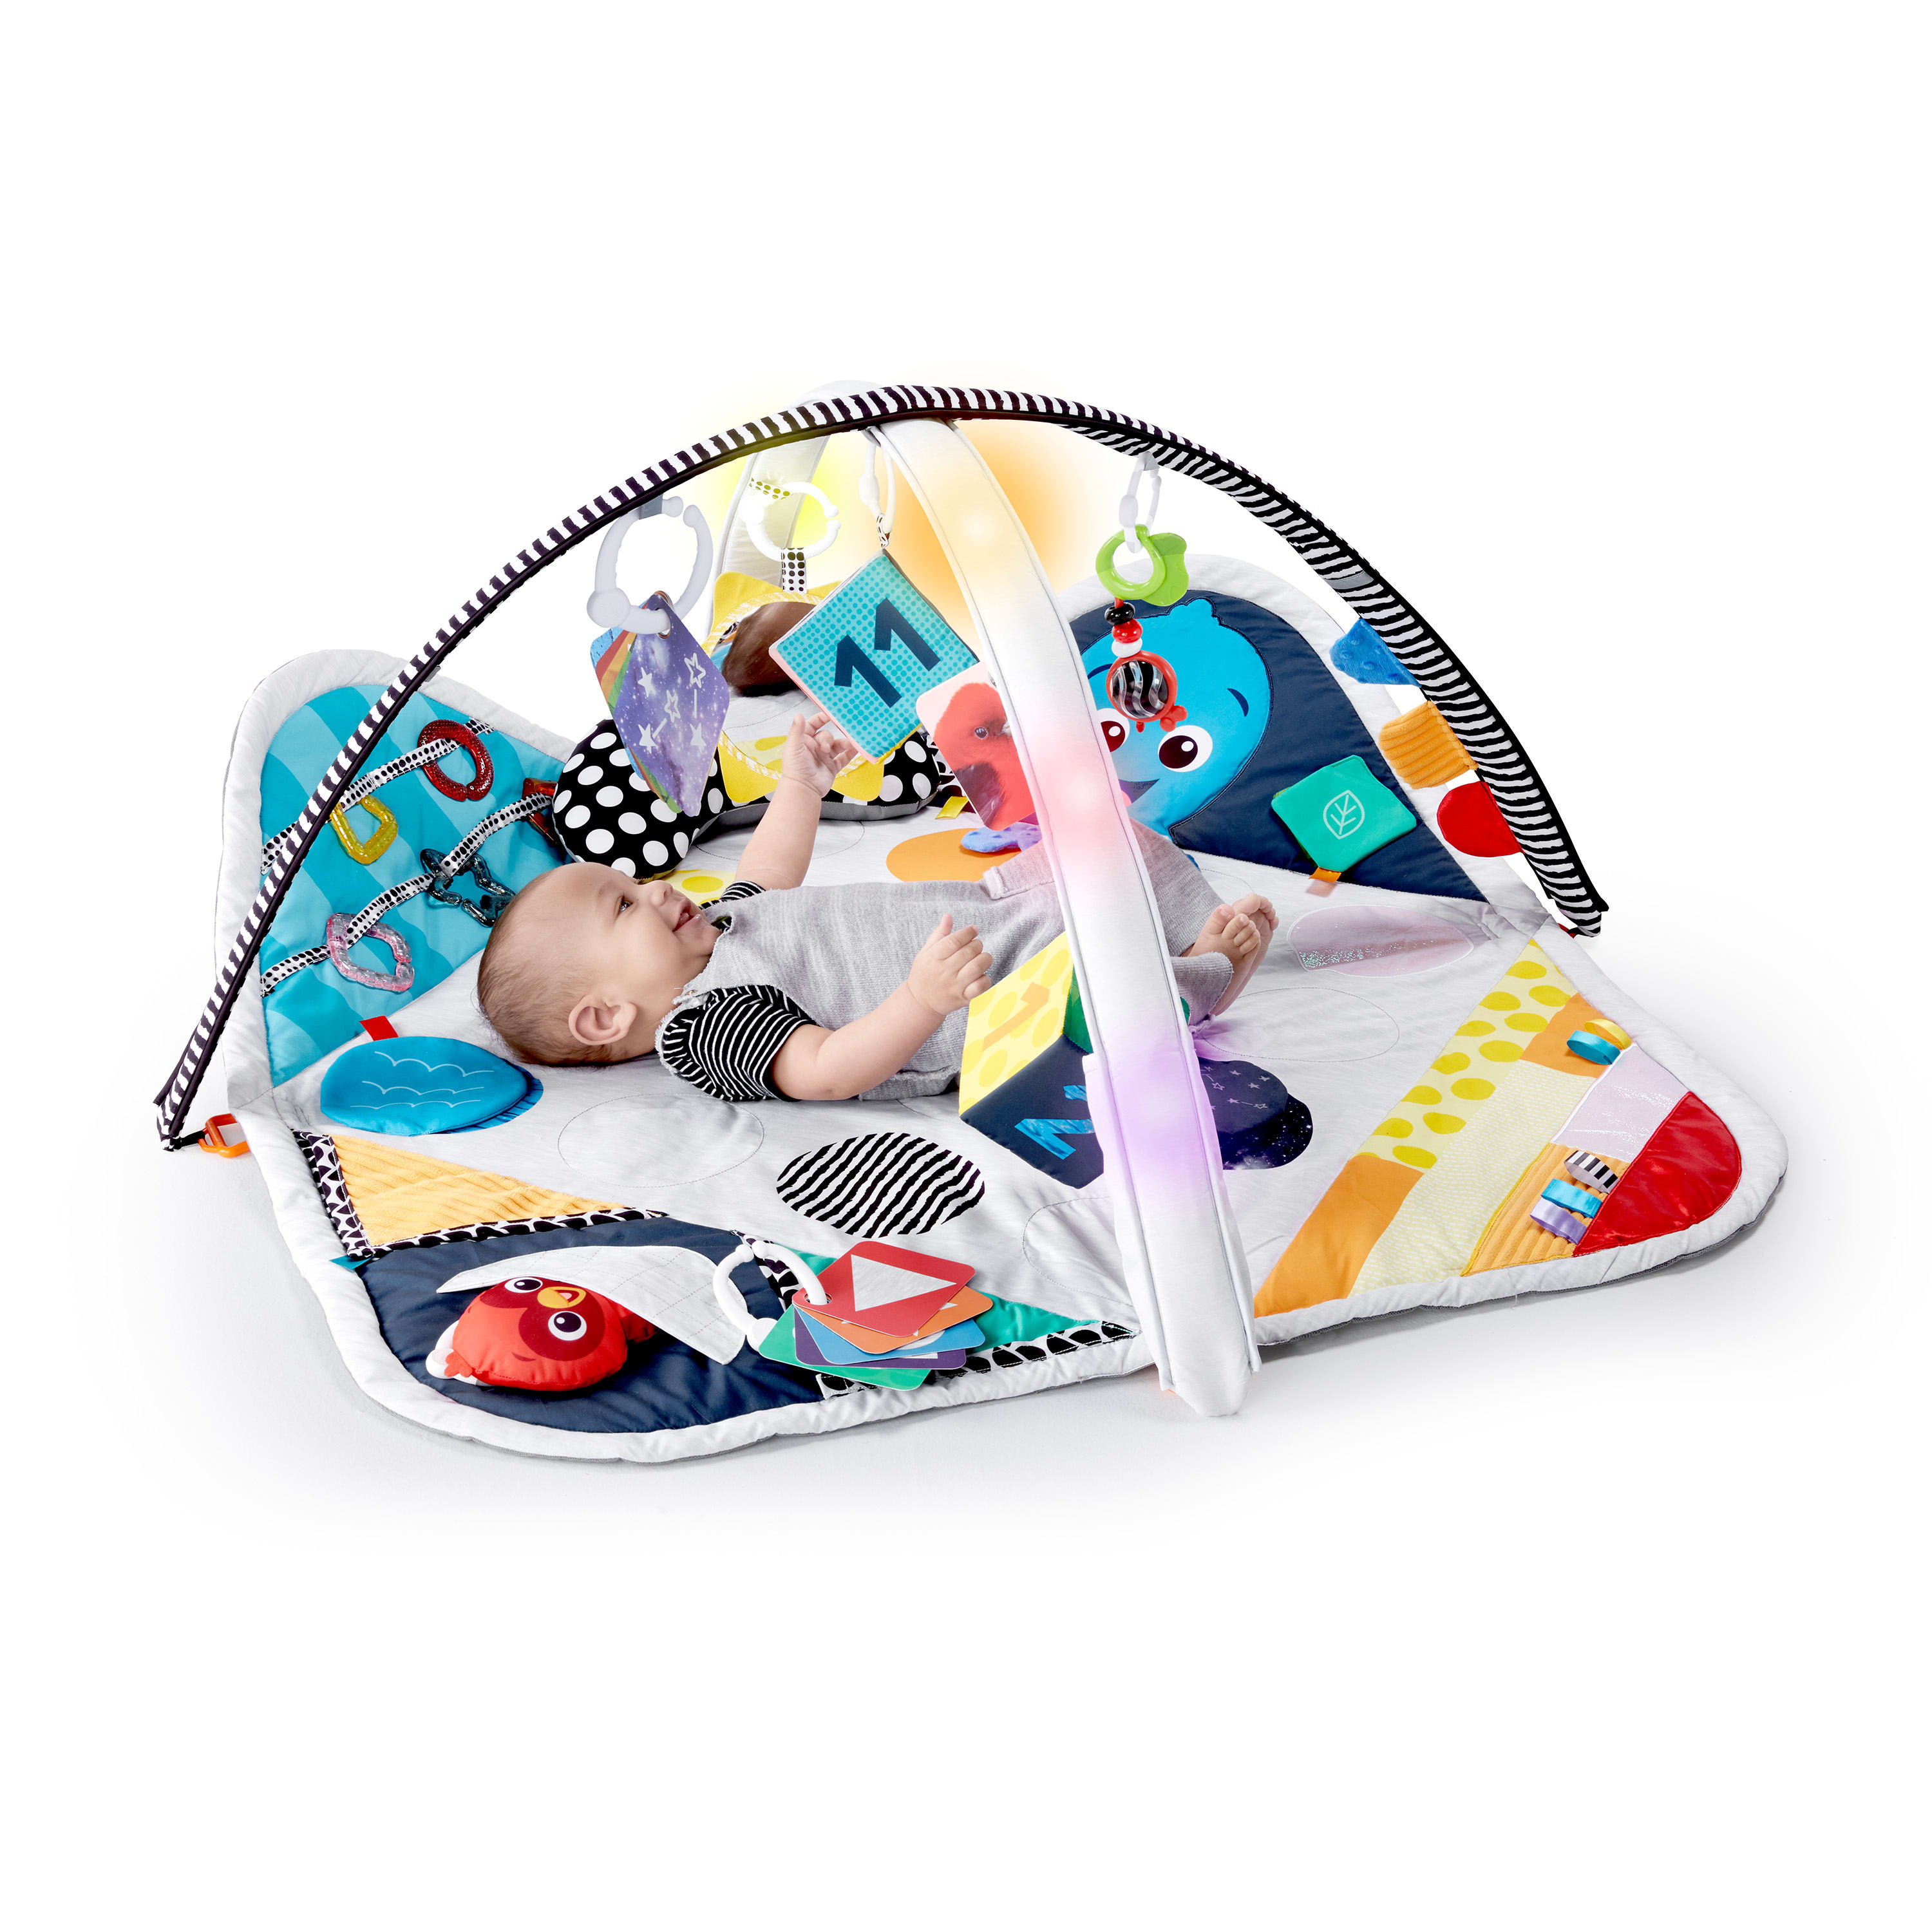 Baby Einstein Sensory Play Space Newborn-to-Toddler Discovery Gym and Play Mat, Ages Newborn + - image 3 of 17